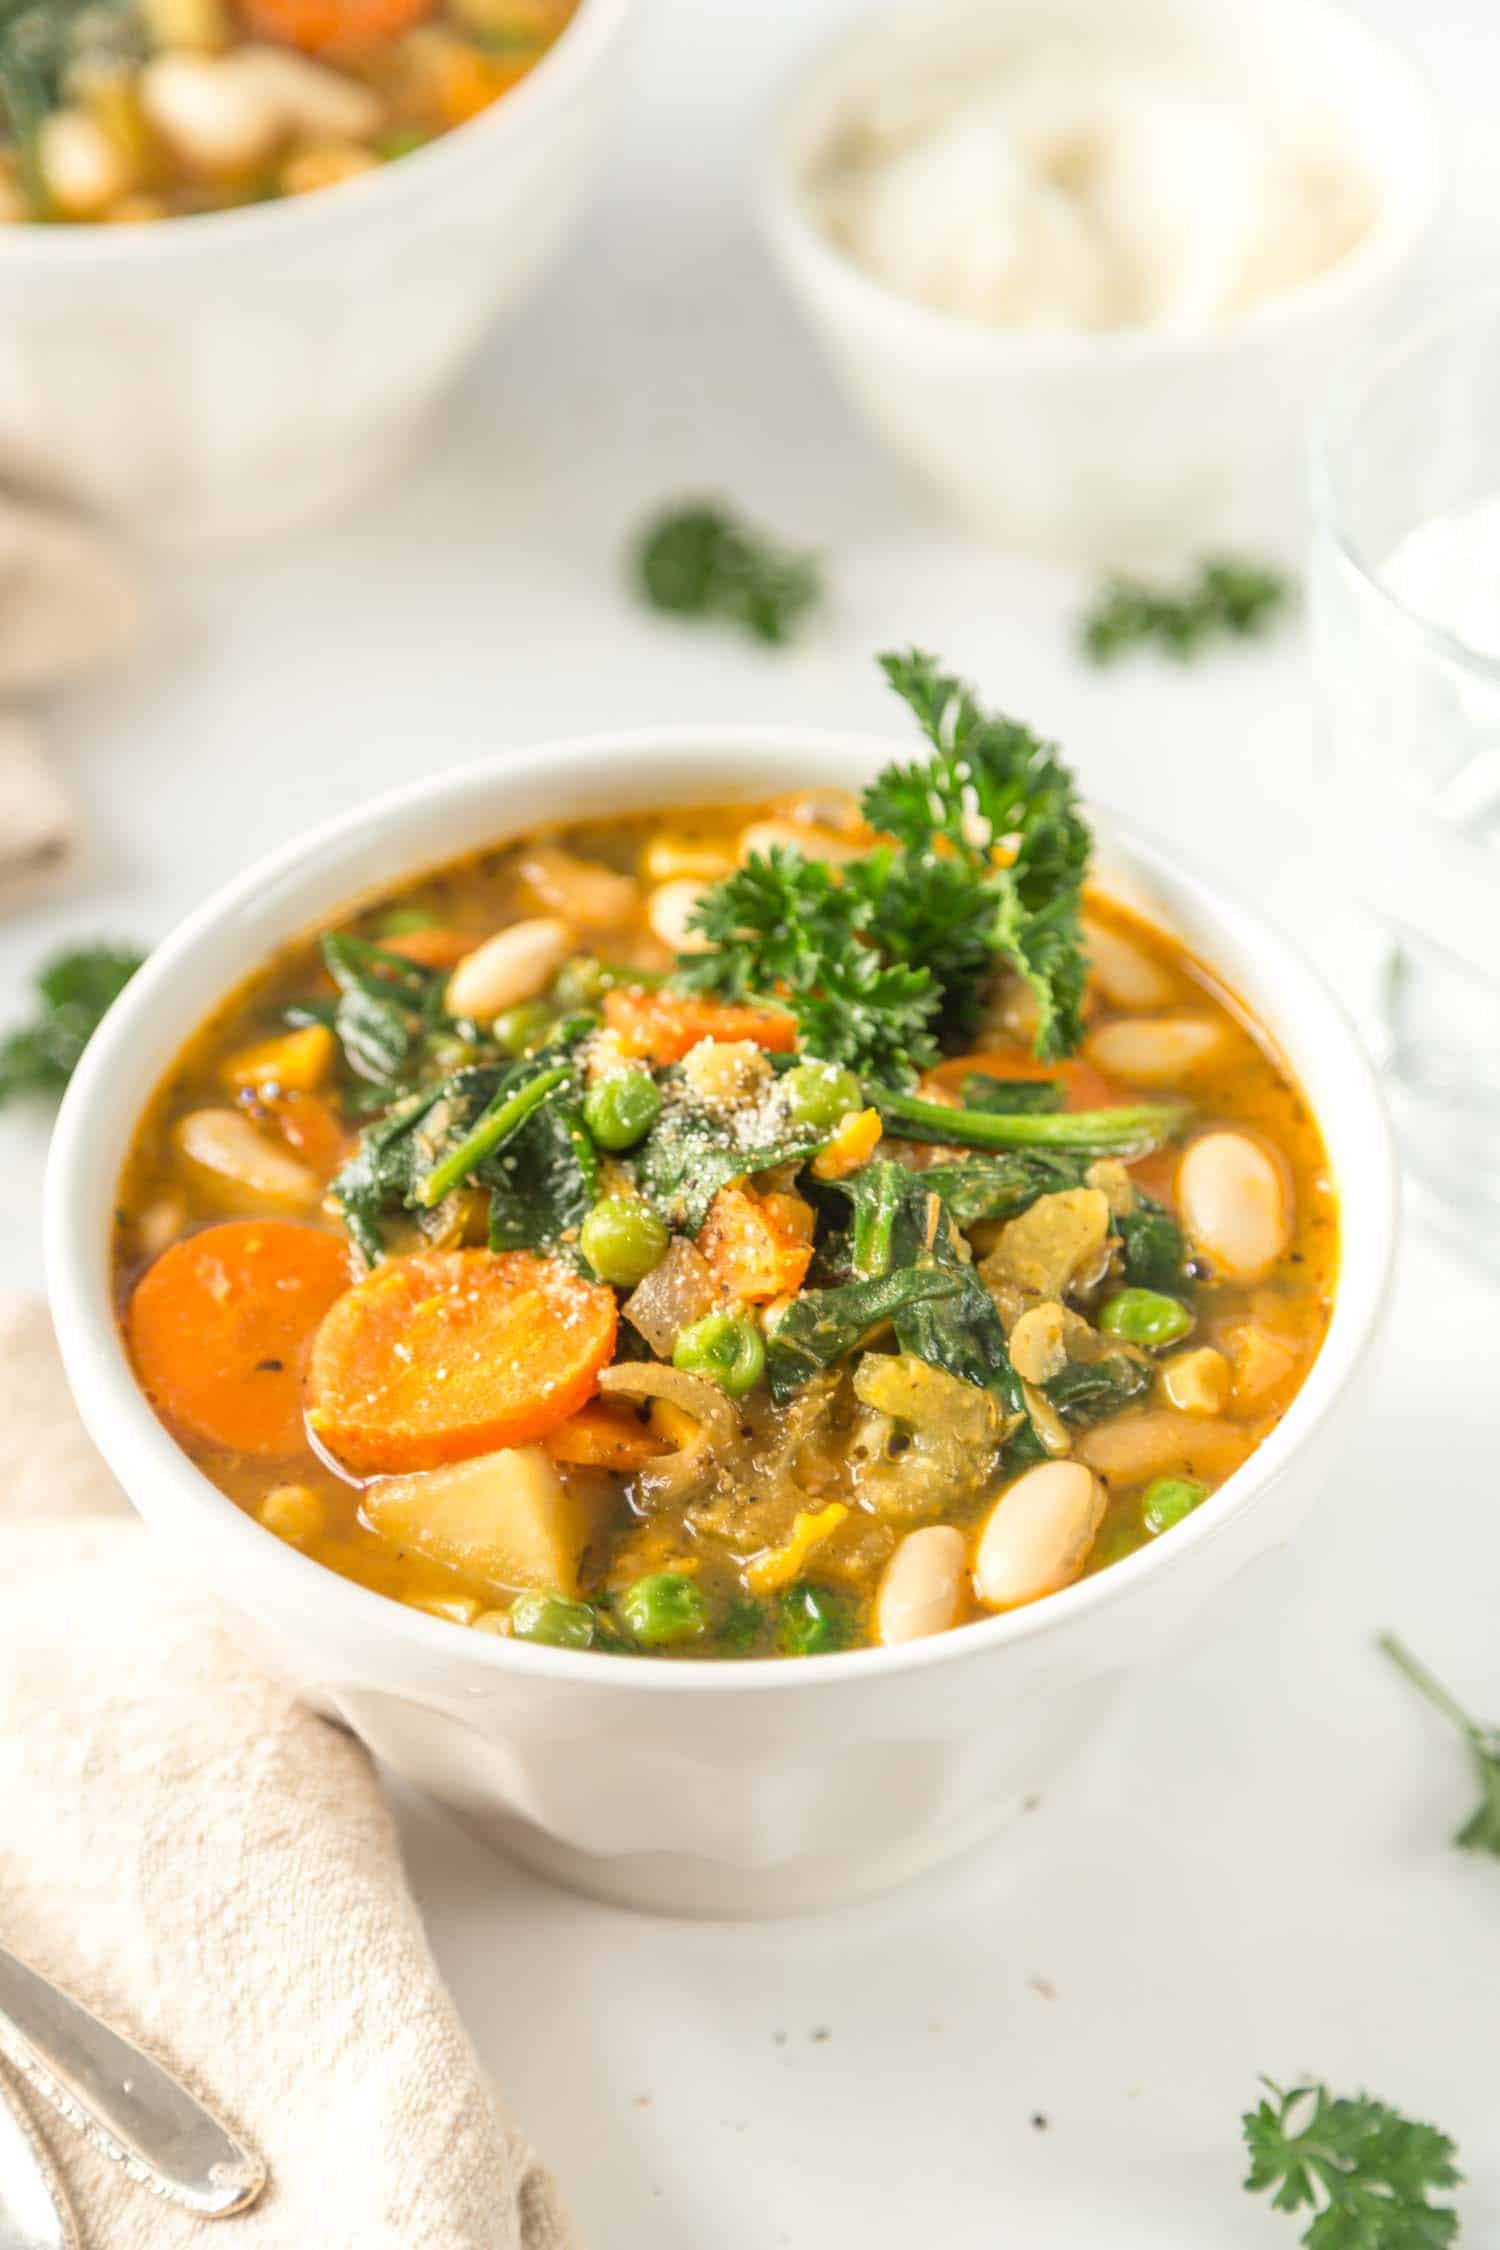 Delicious vegan stew with beans and lentils in a bowl.